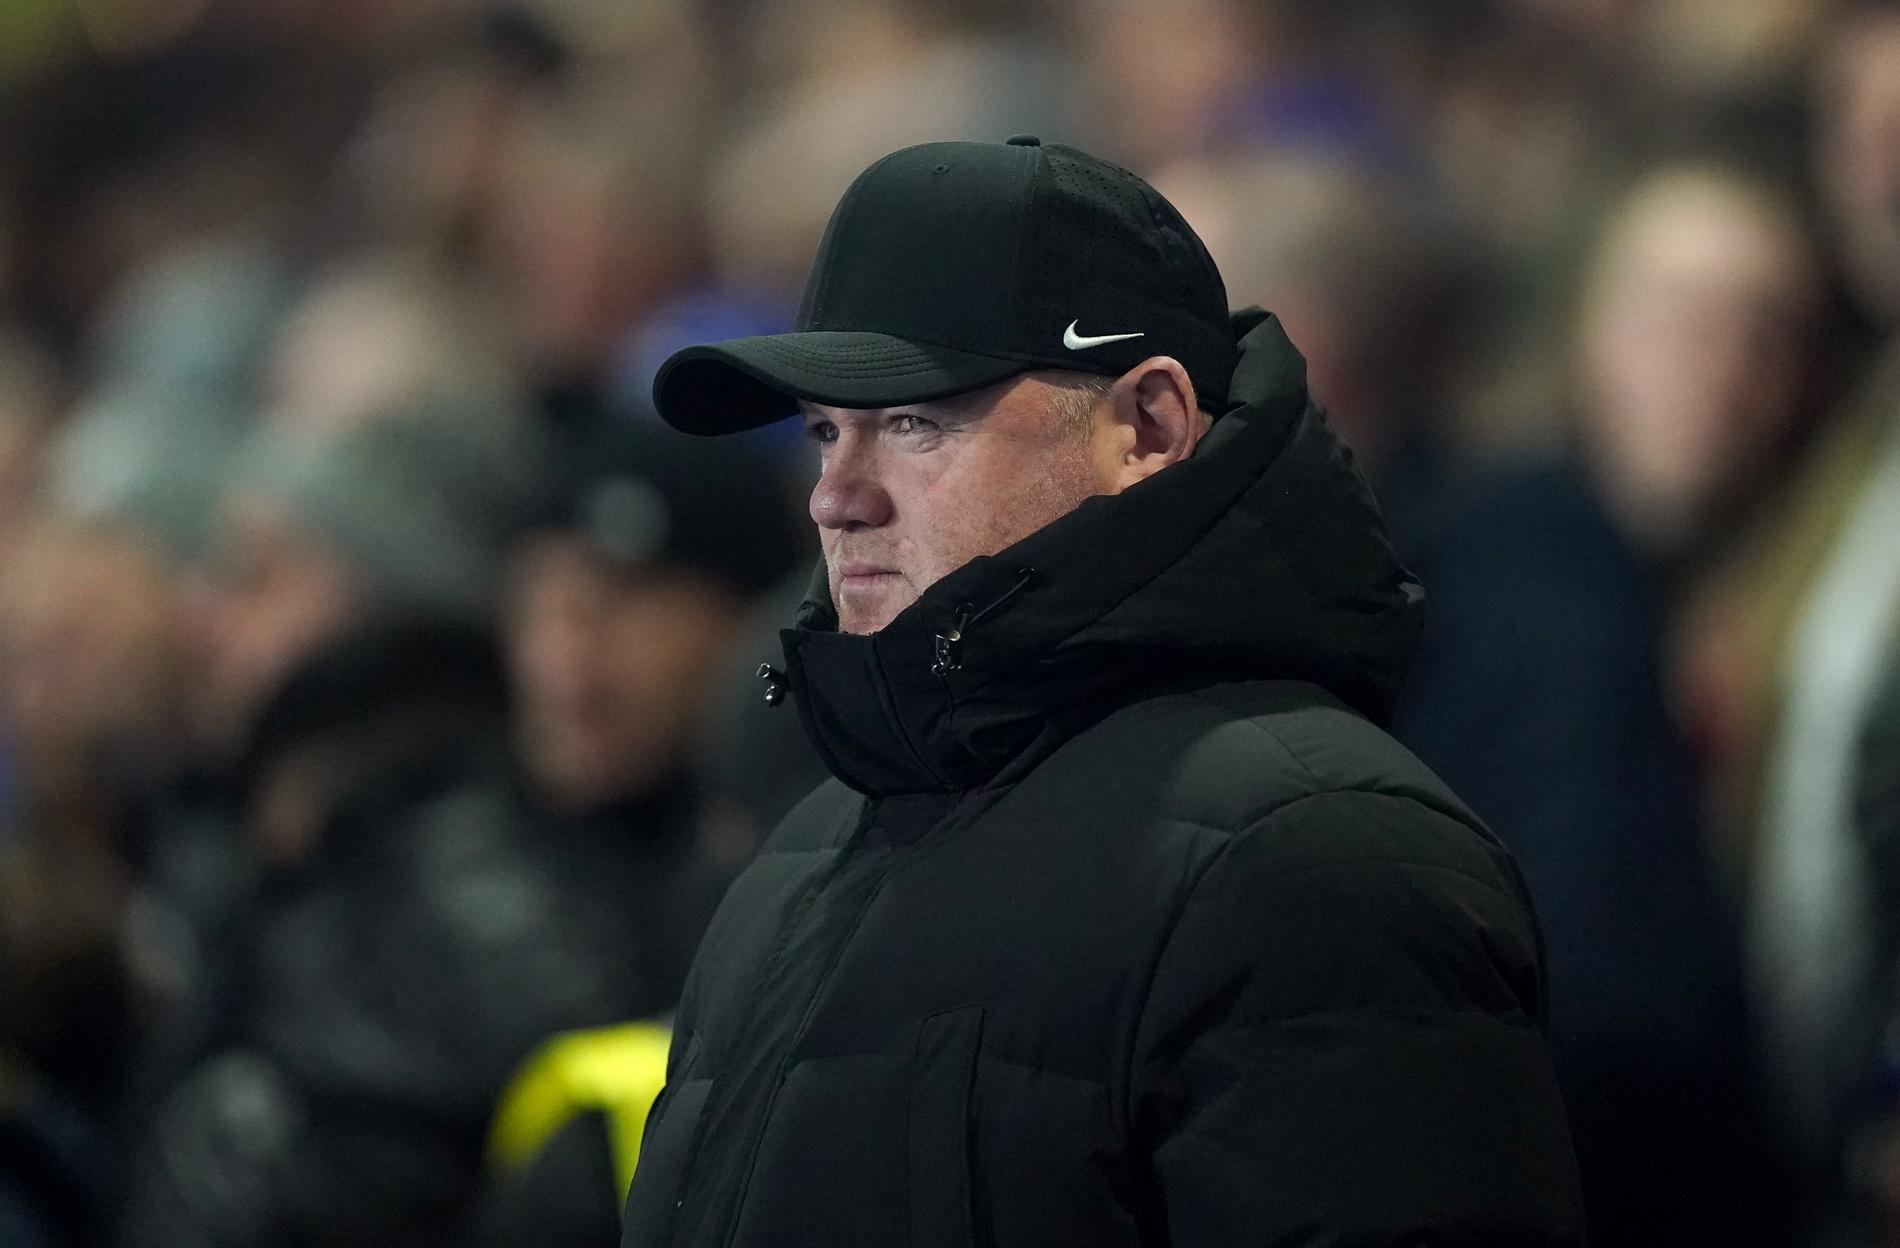 Wayne Rooney's nightmare continues at Birmingham, where he has two wins in 12 matches